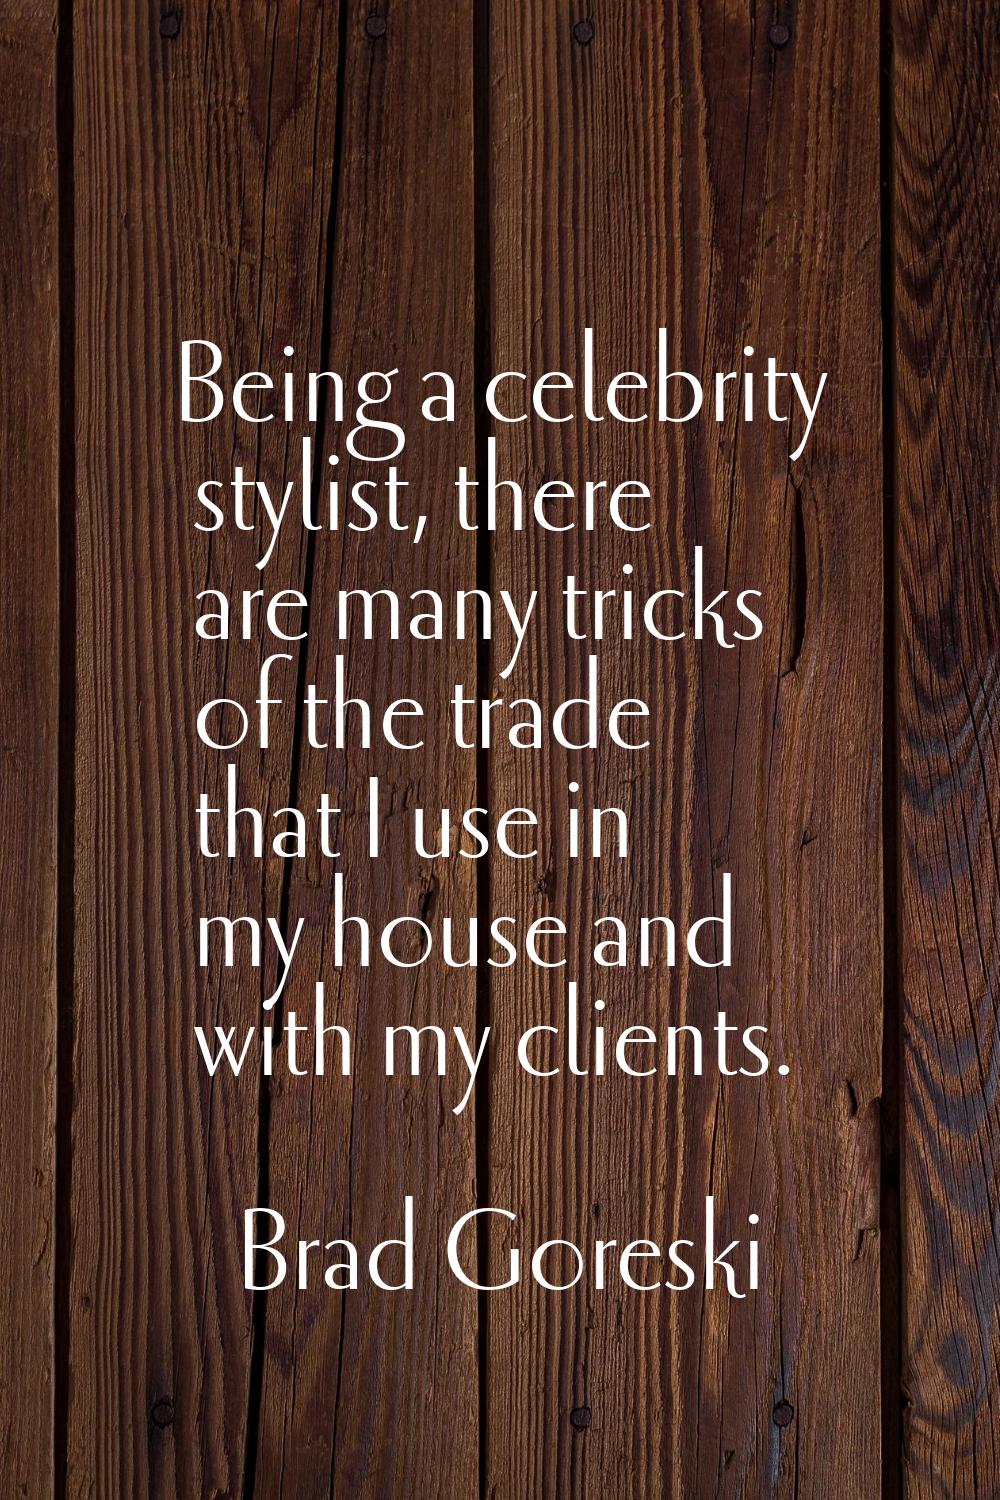 Being a celebrity stylist, there are many tricks of the trade that I use in my house and with my cl